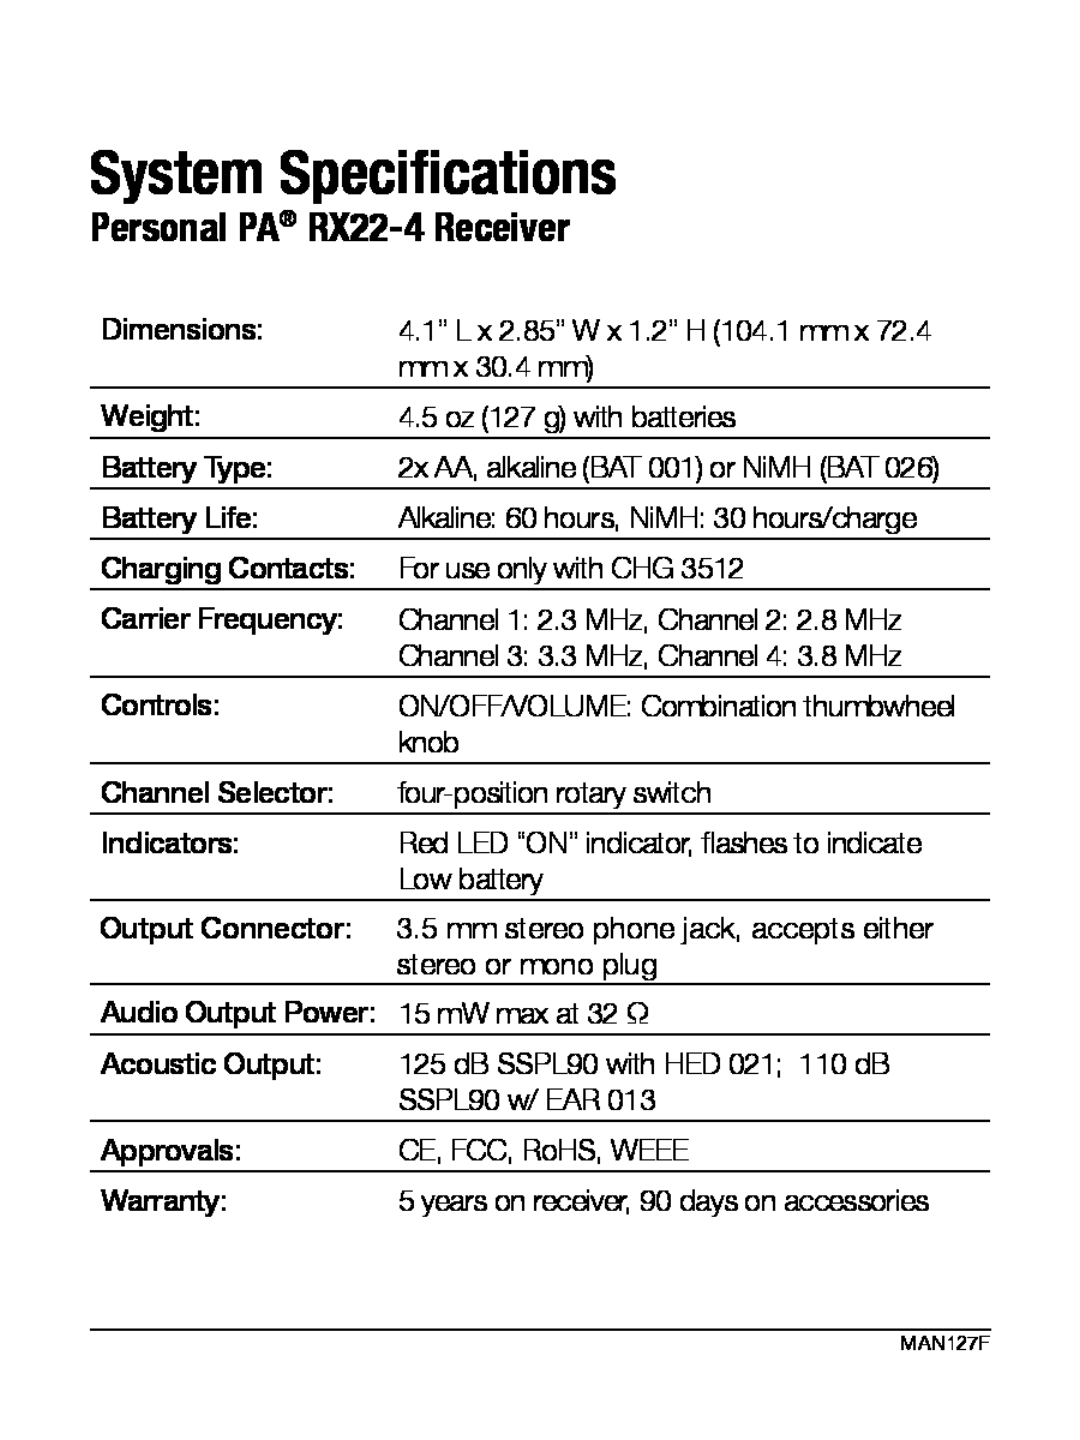 Williams Sound WIR RX22-4 manual System Specifications, Personal PA RX22-4Receiver 